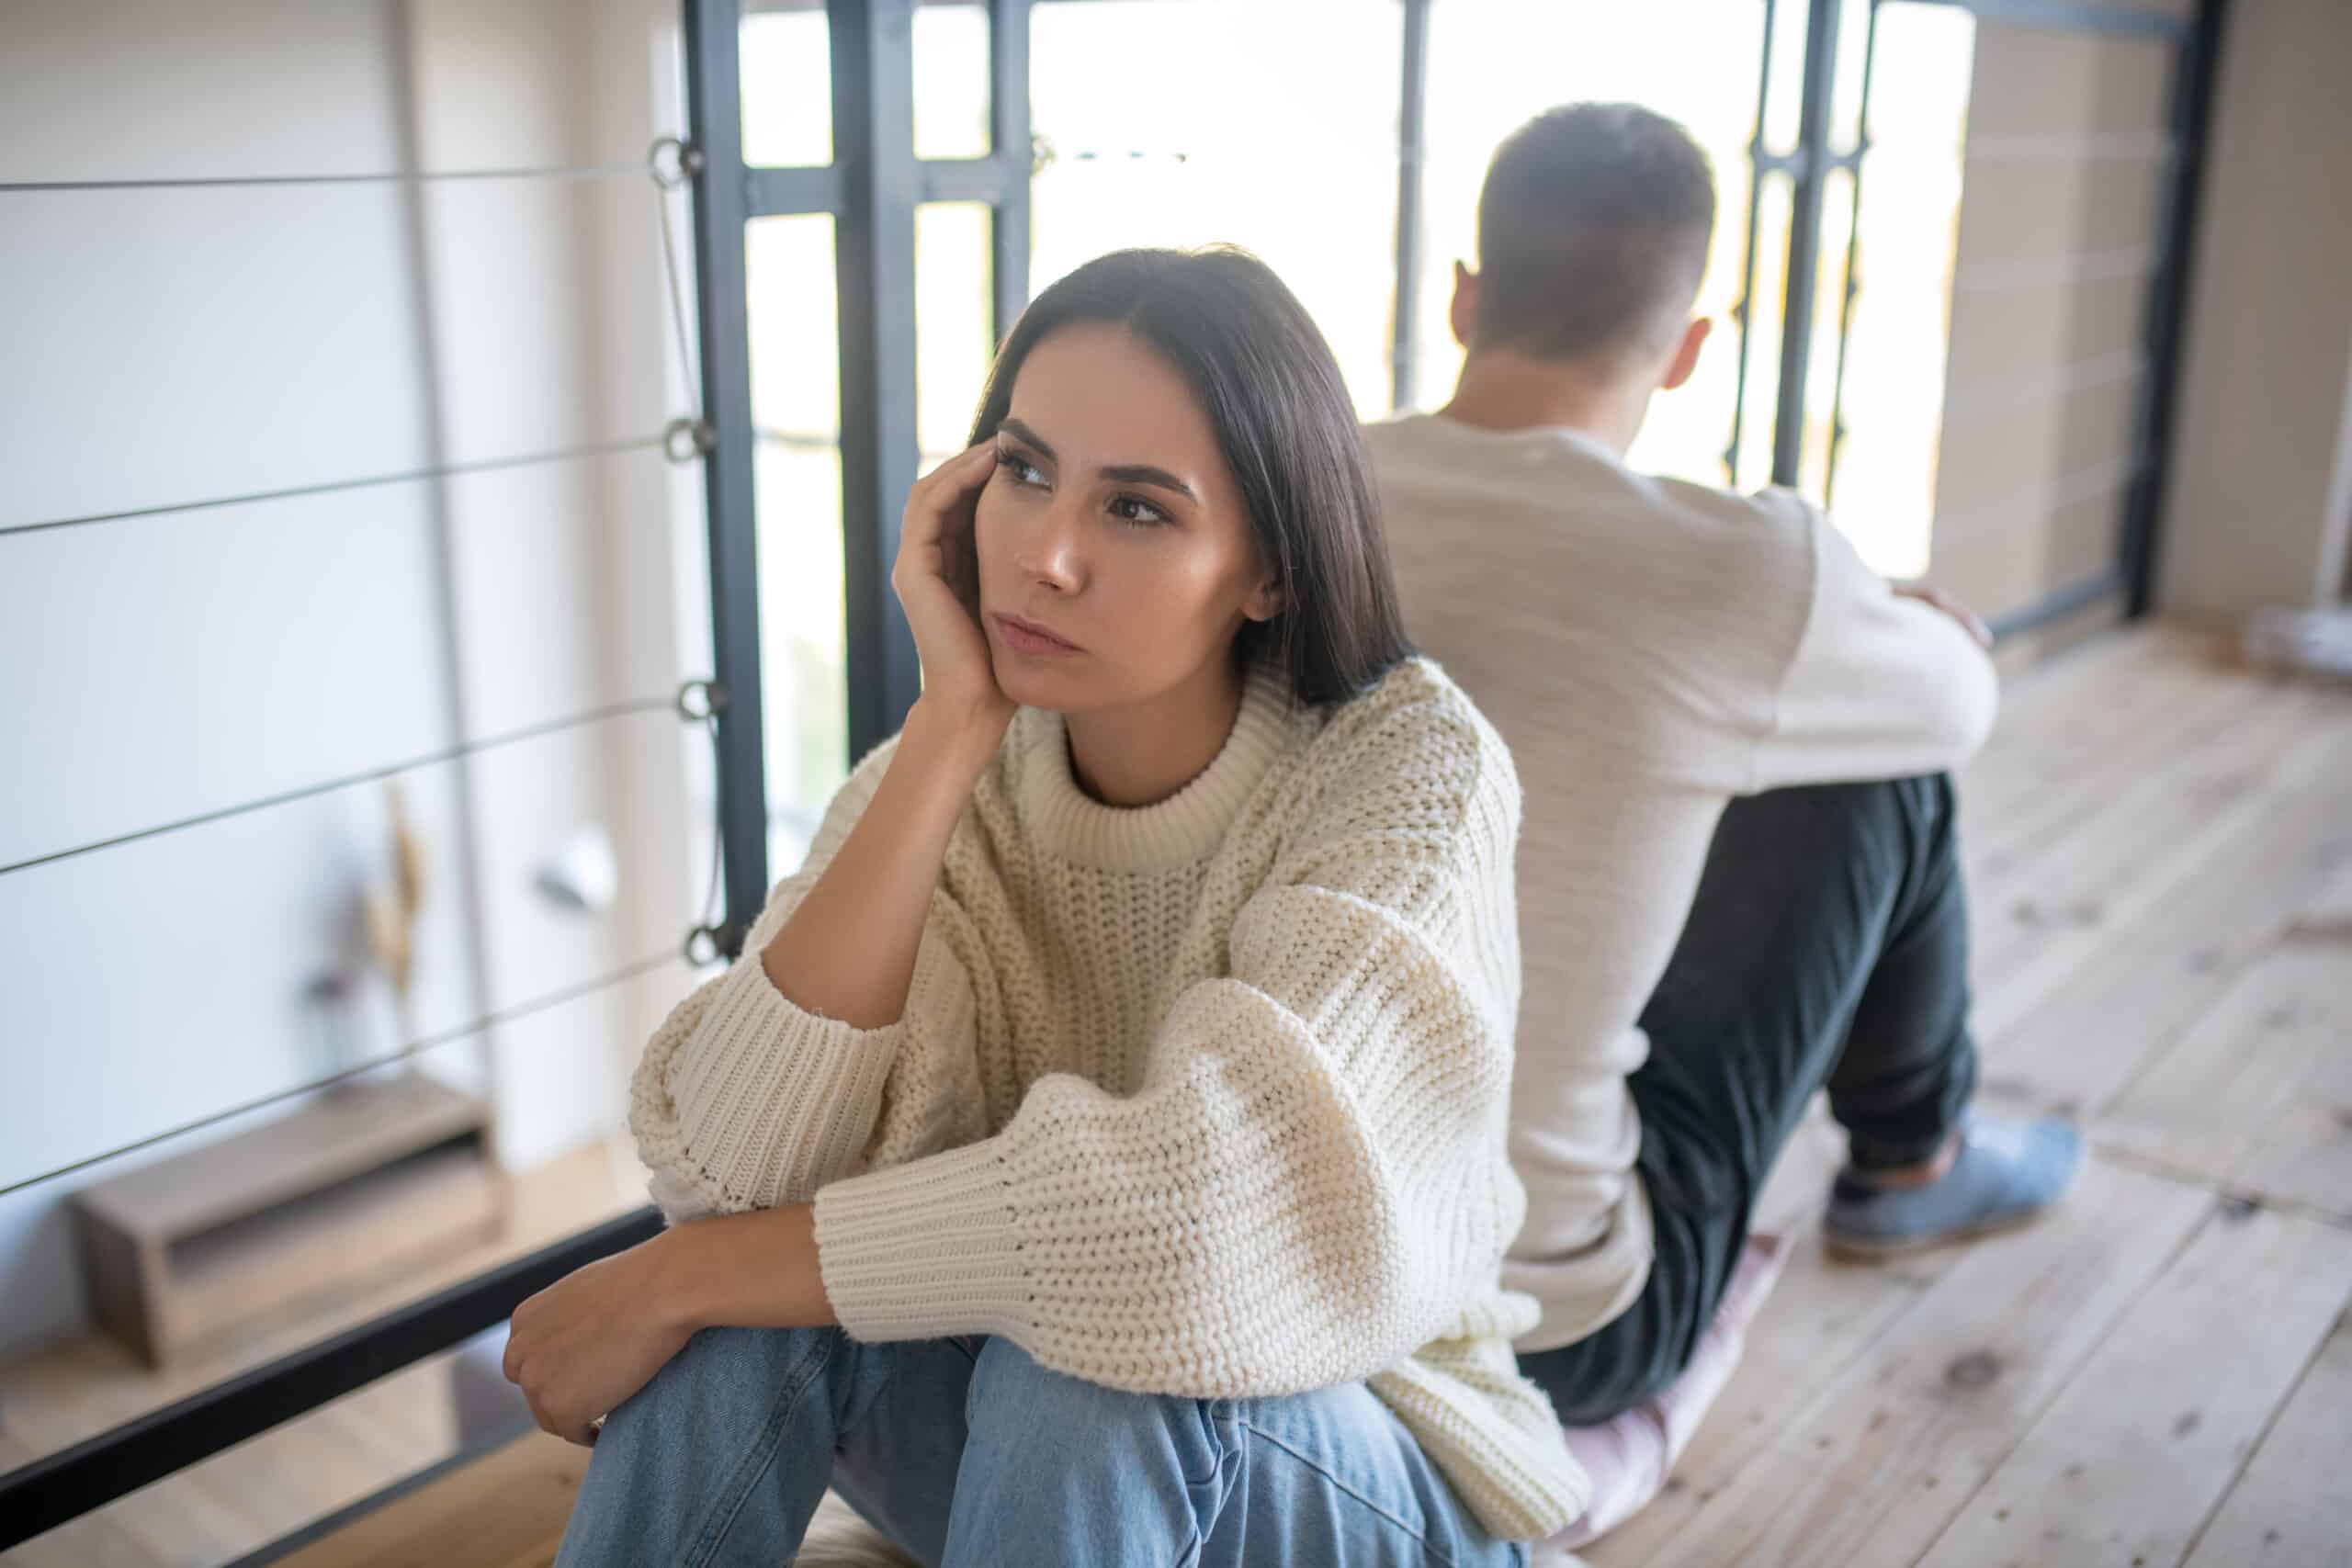 Wife feeling angry and disappointed after argument with wife